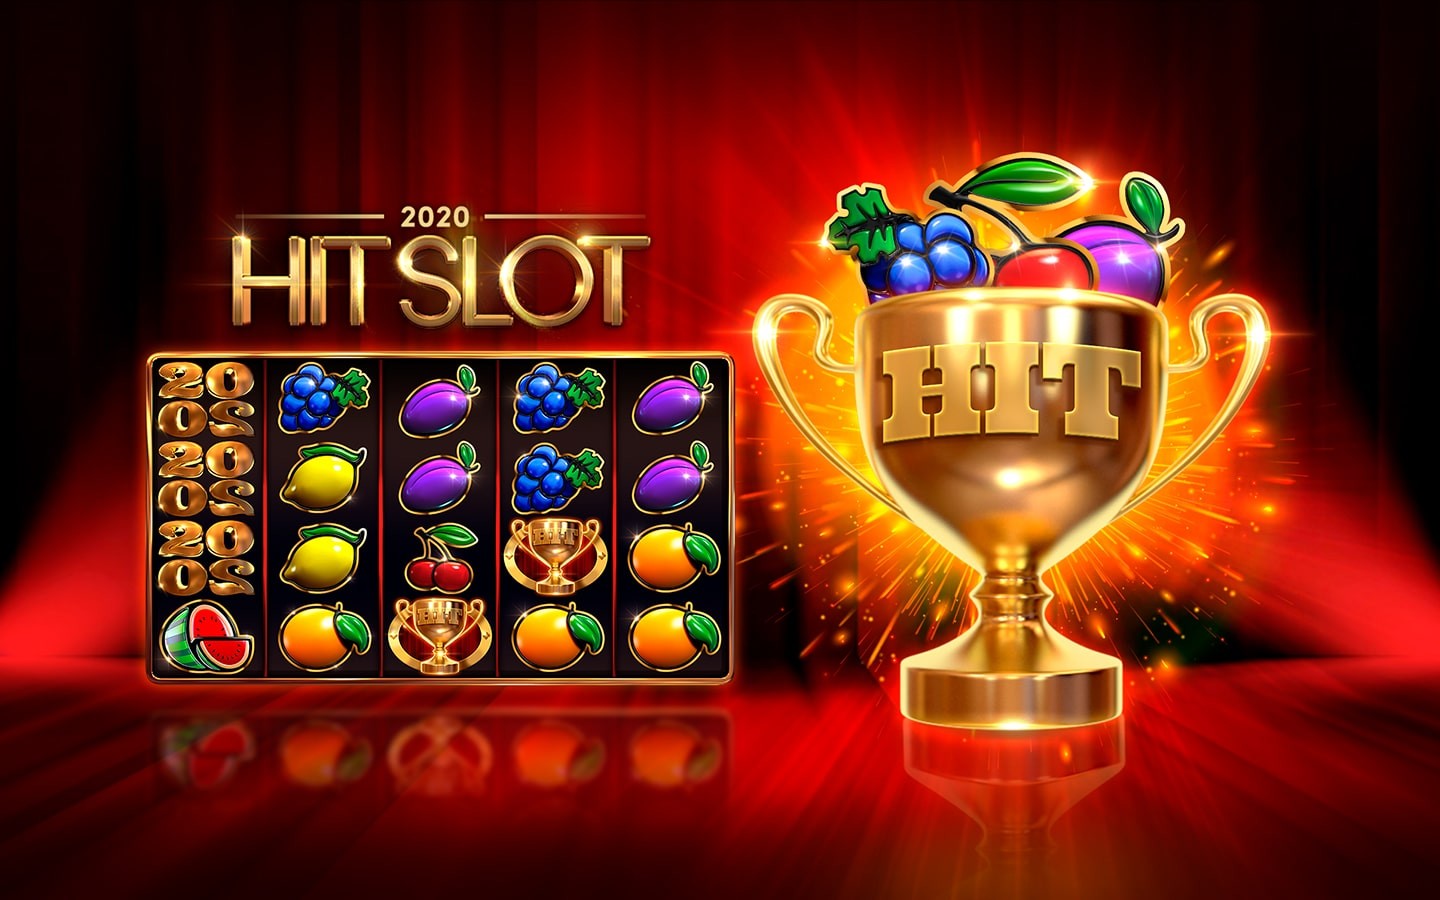 Guide To Making Money From Playing Slot Games: A Beginner’s Guide